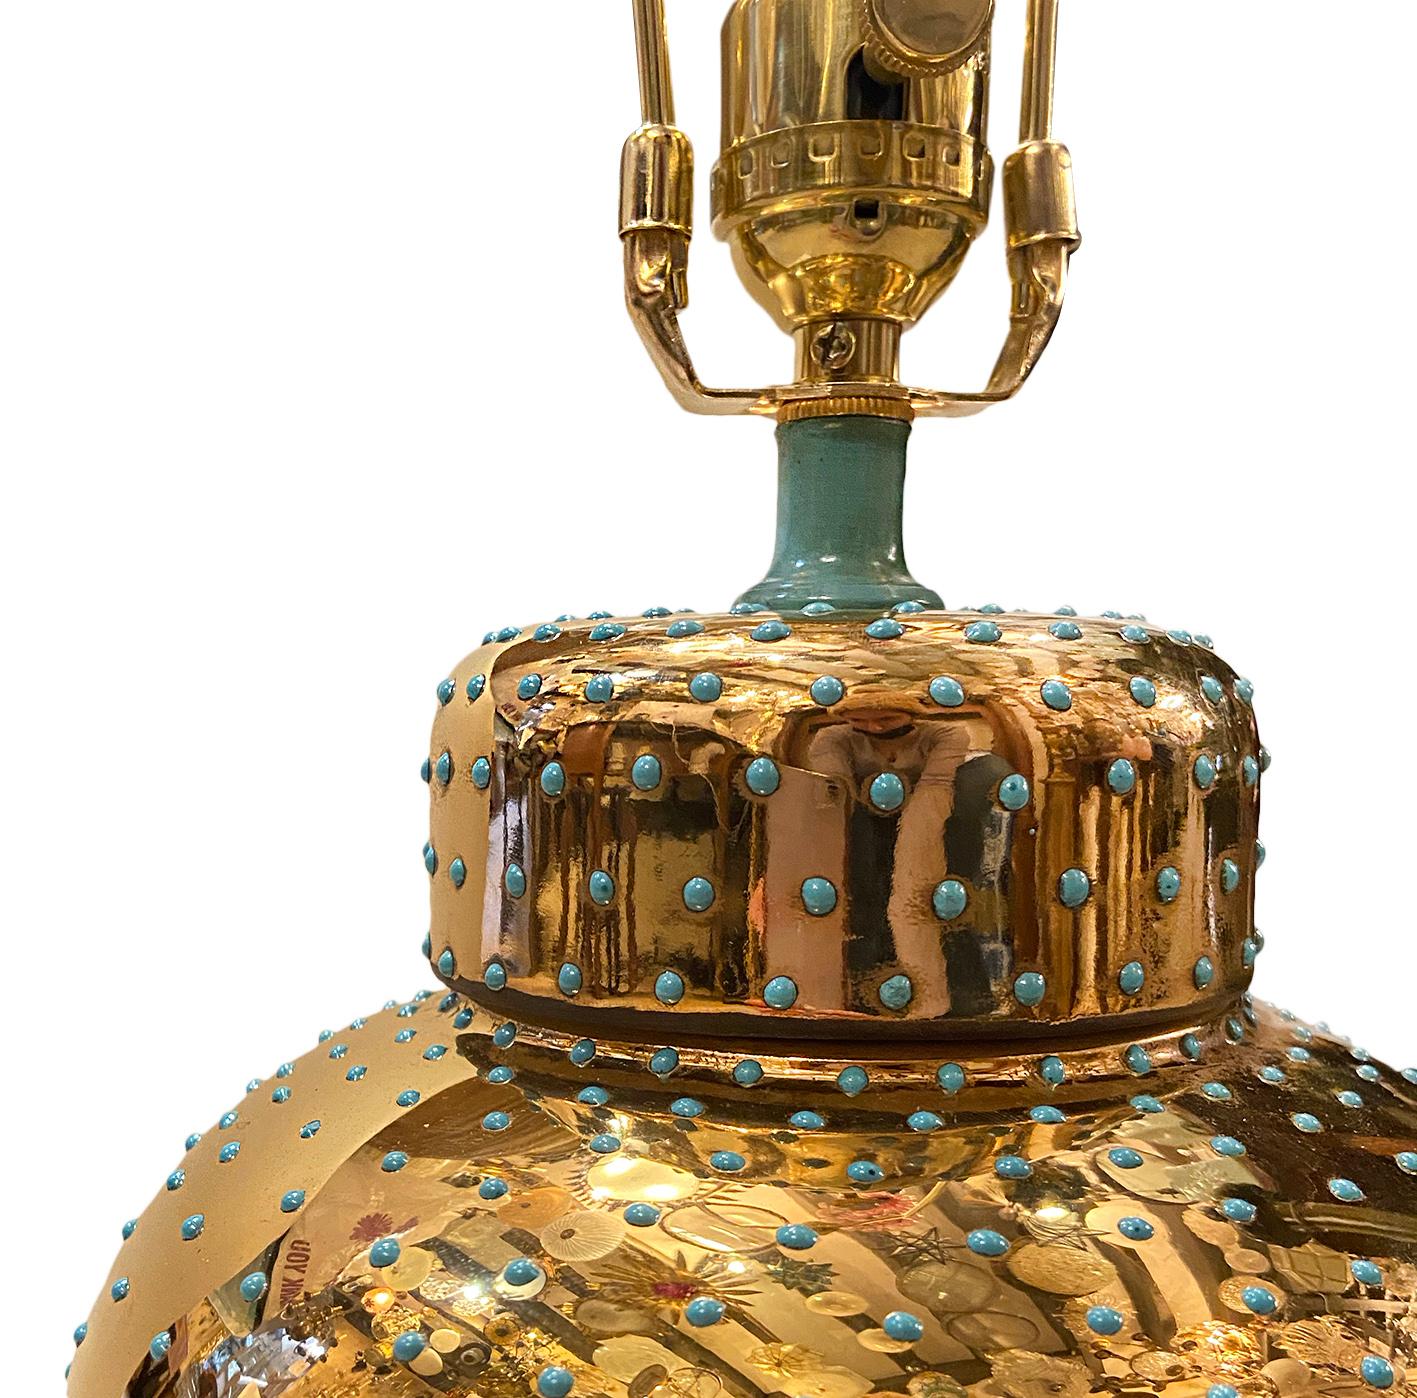 An Italian reflective gold mirror-glazed porcelain table lamp with turquoise details and lucite base, circa 1960s.

Measurements:
Height 12.75